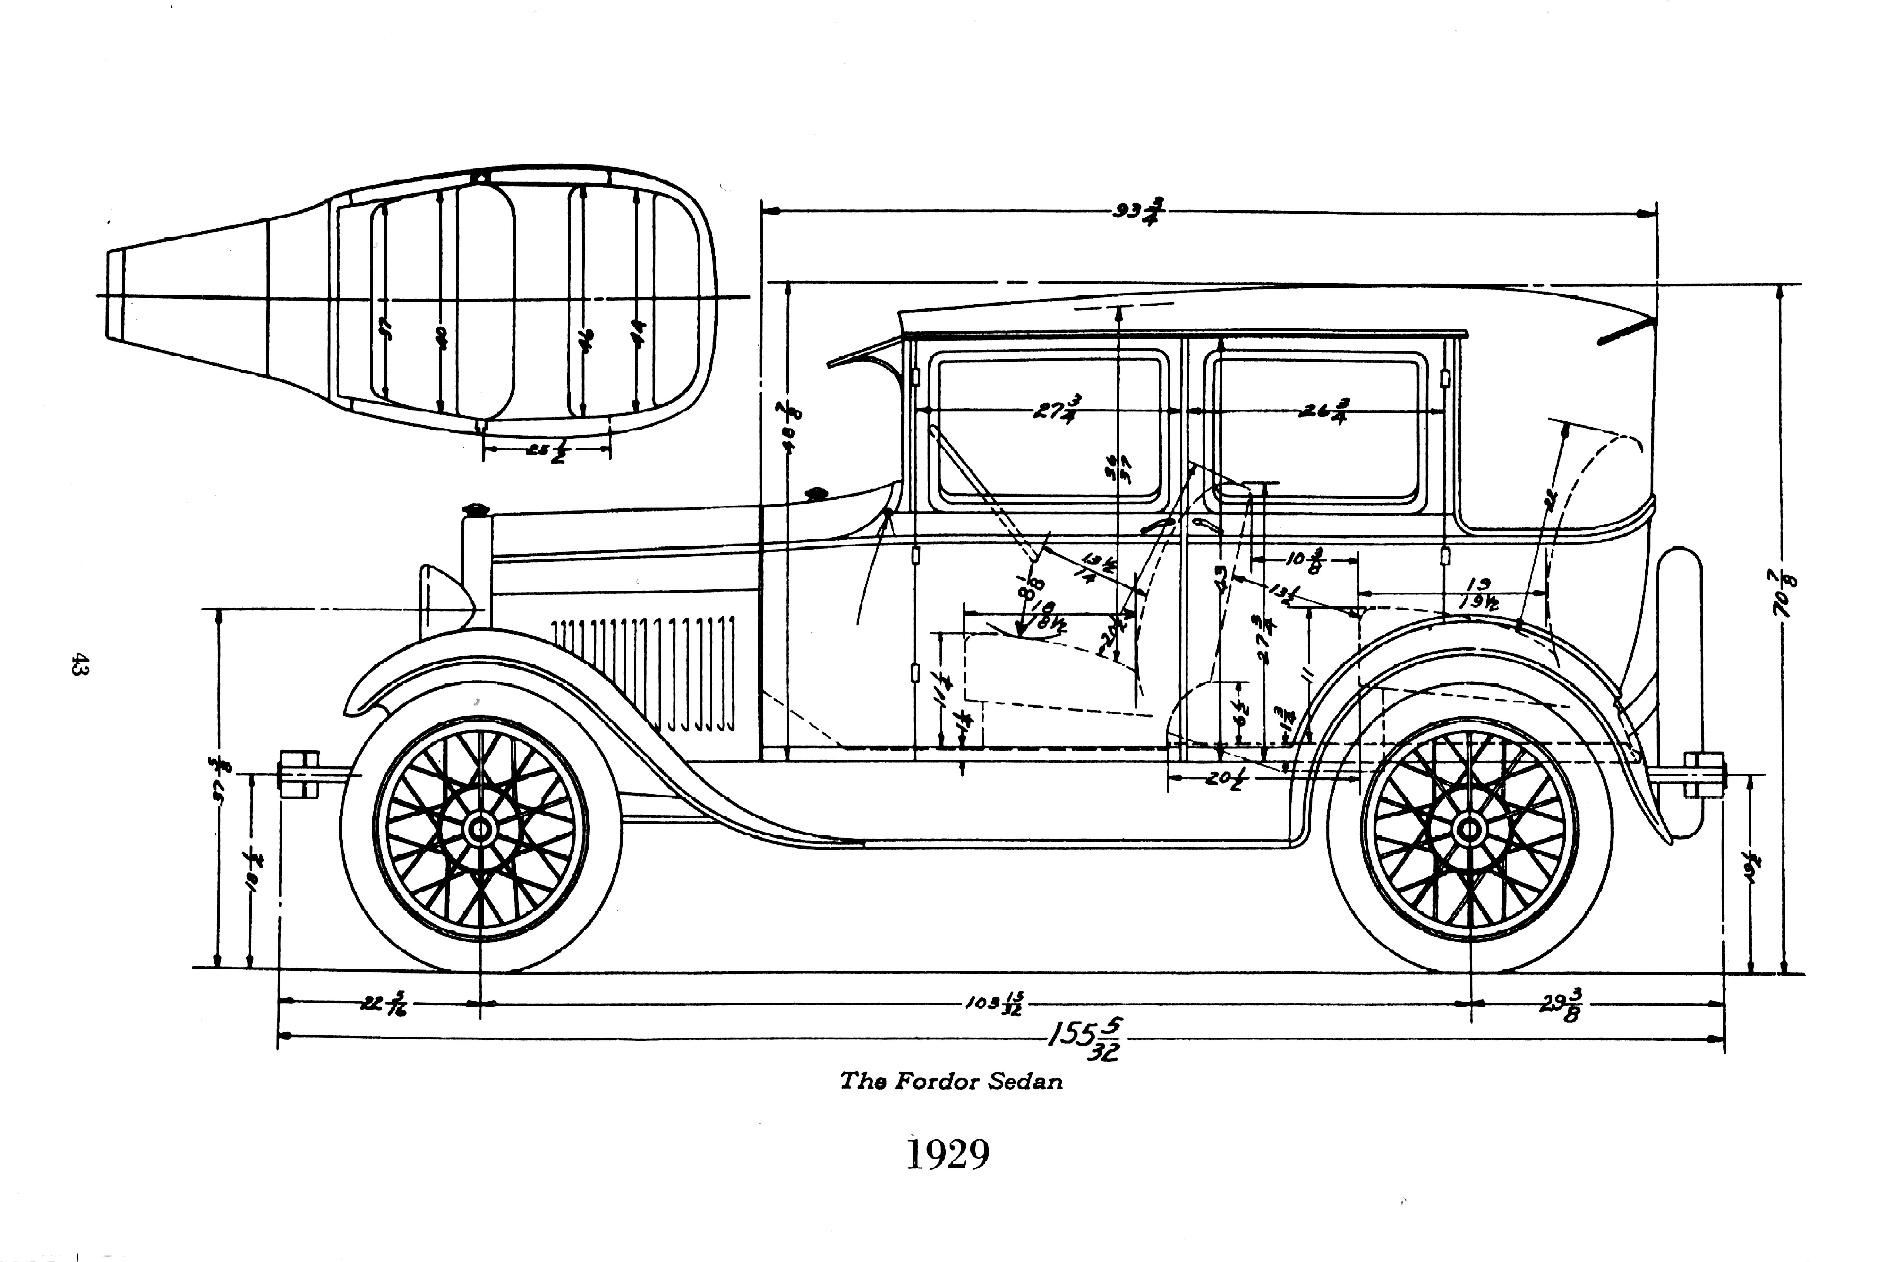 Model a ford body plans #3